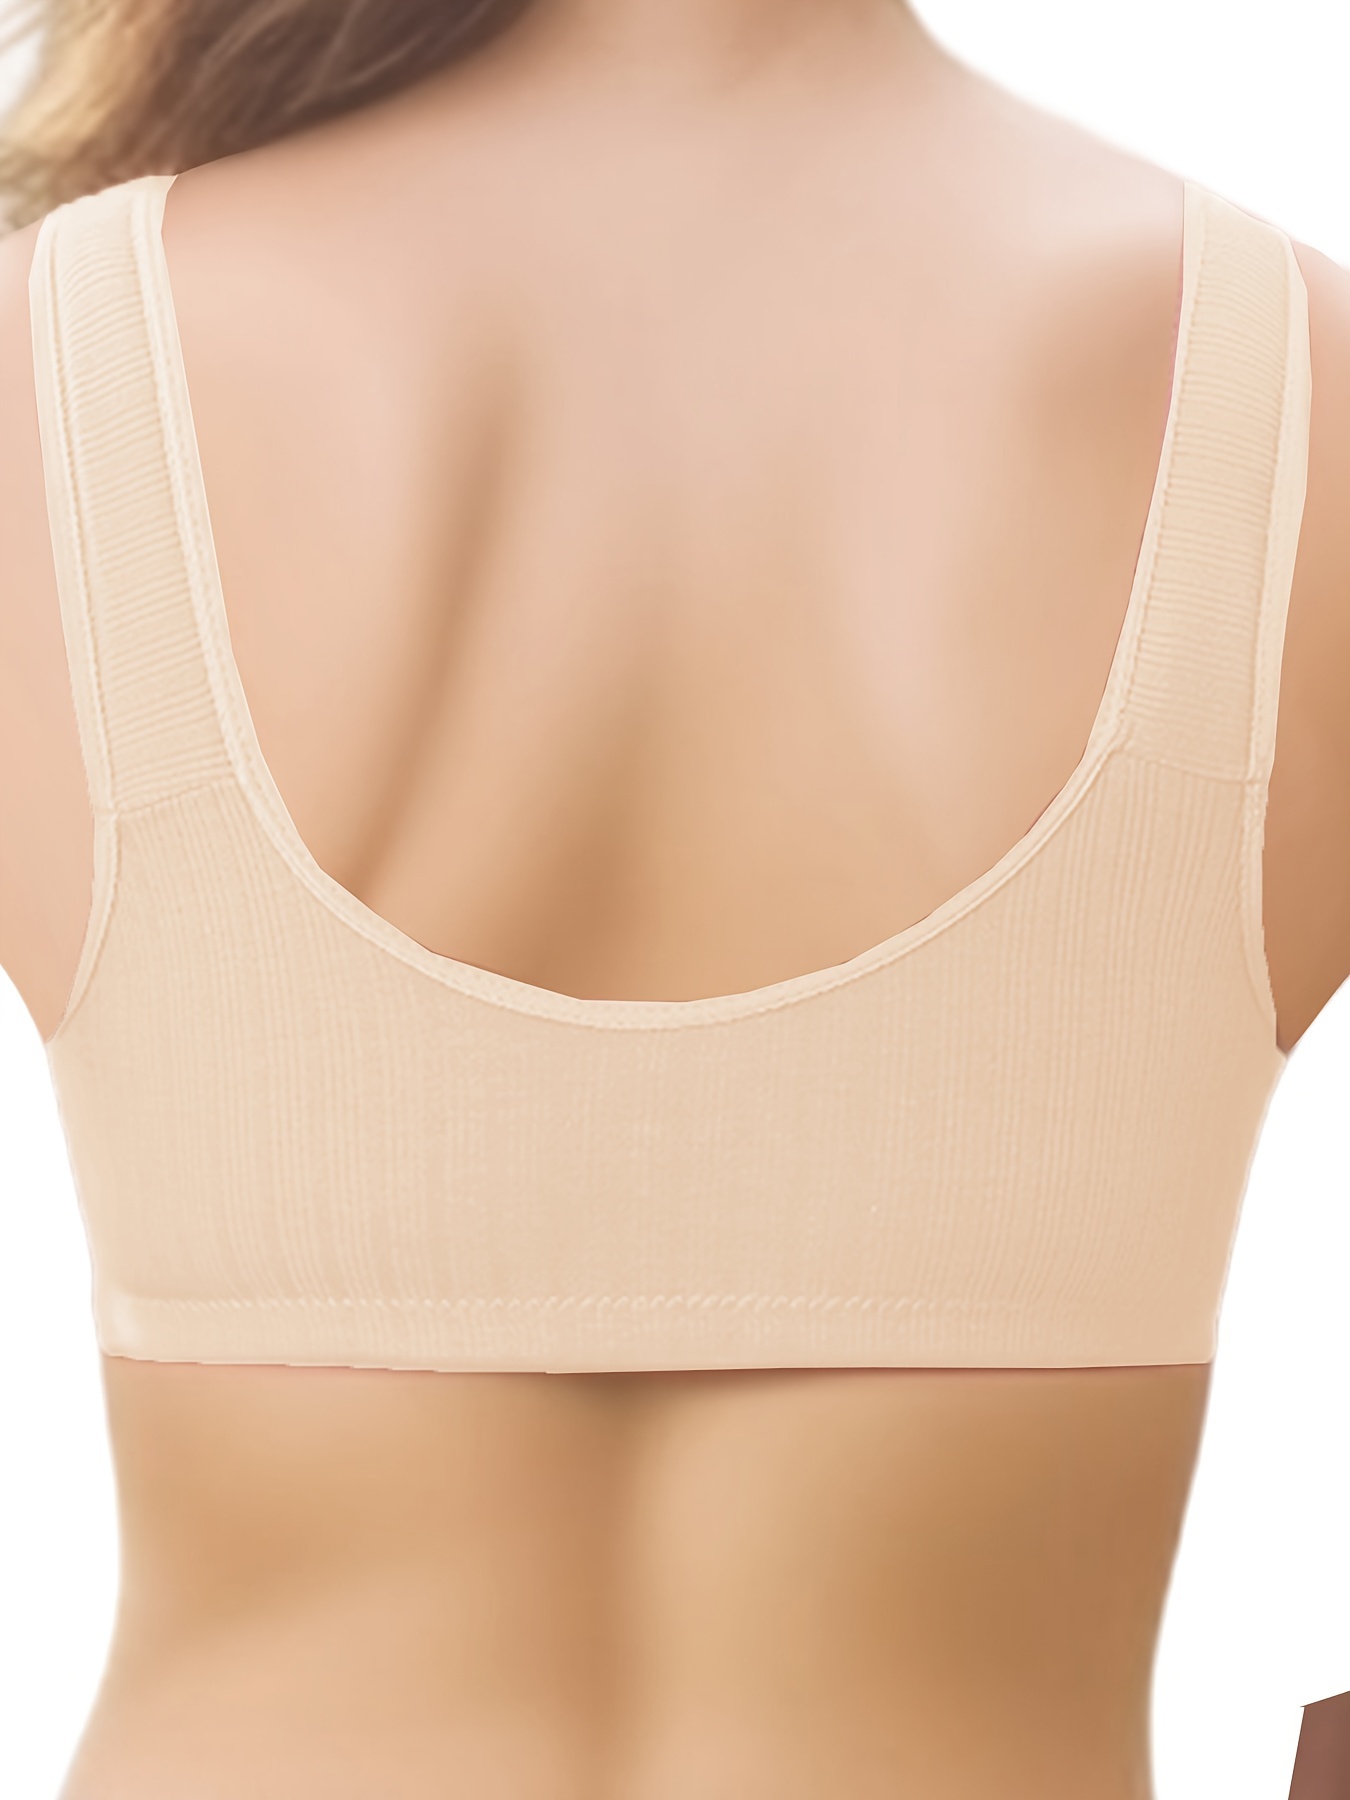 3pcs Women Front Closure Bras - Lift Up And Support Your Back, Wireless  Sports Bra, Women's Lingerie & Underwear